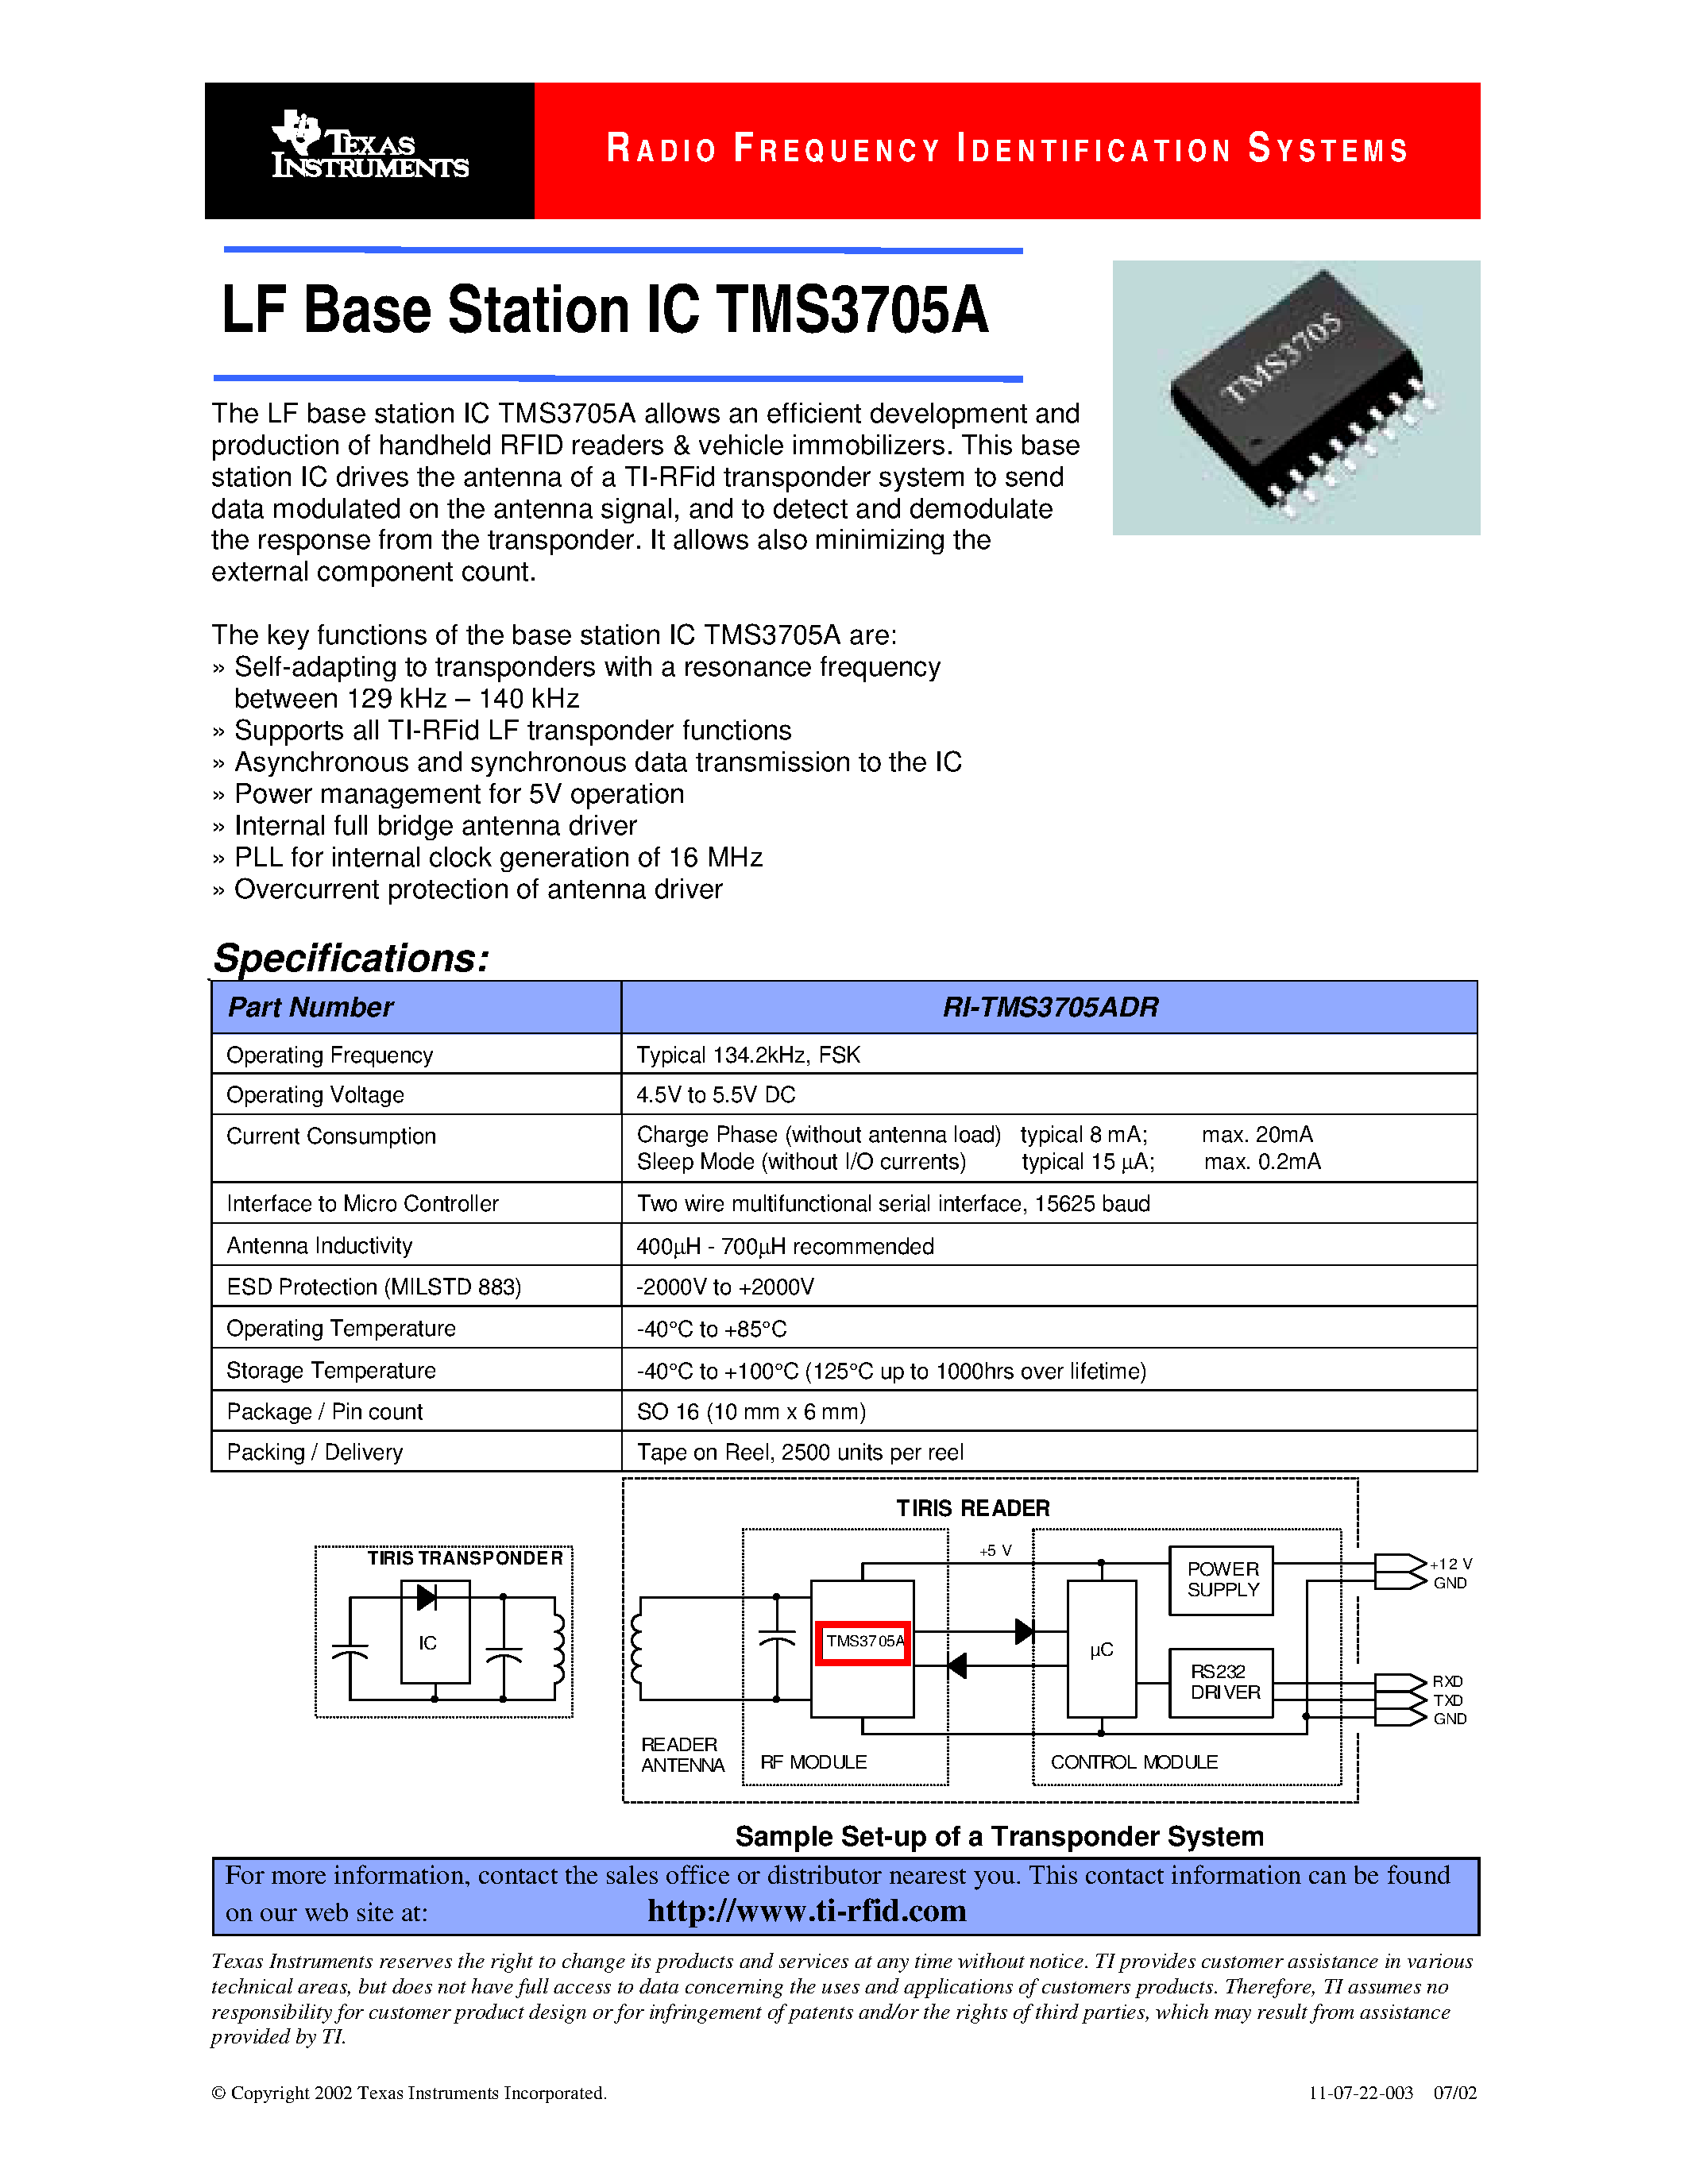 Datasheet TMS3705A - RA D I O FREQUEN C Y I DENTI F ICATION SY S T EMS page 1